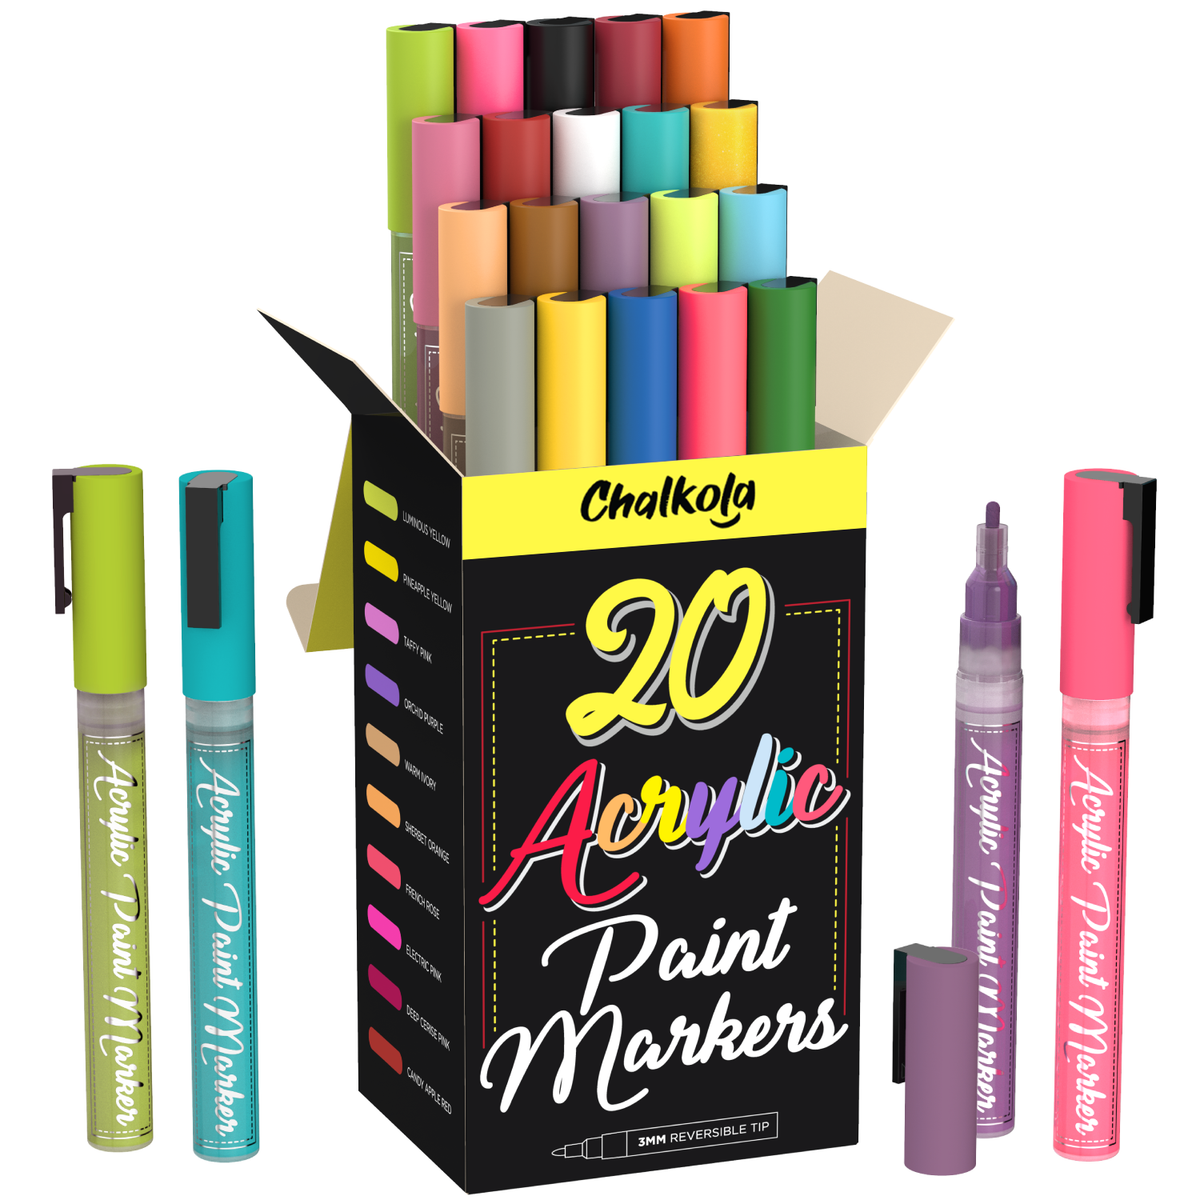 Acrylic Paint Marker Pens - Pack of 20